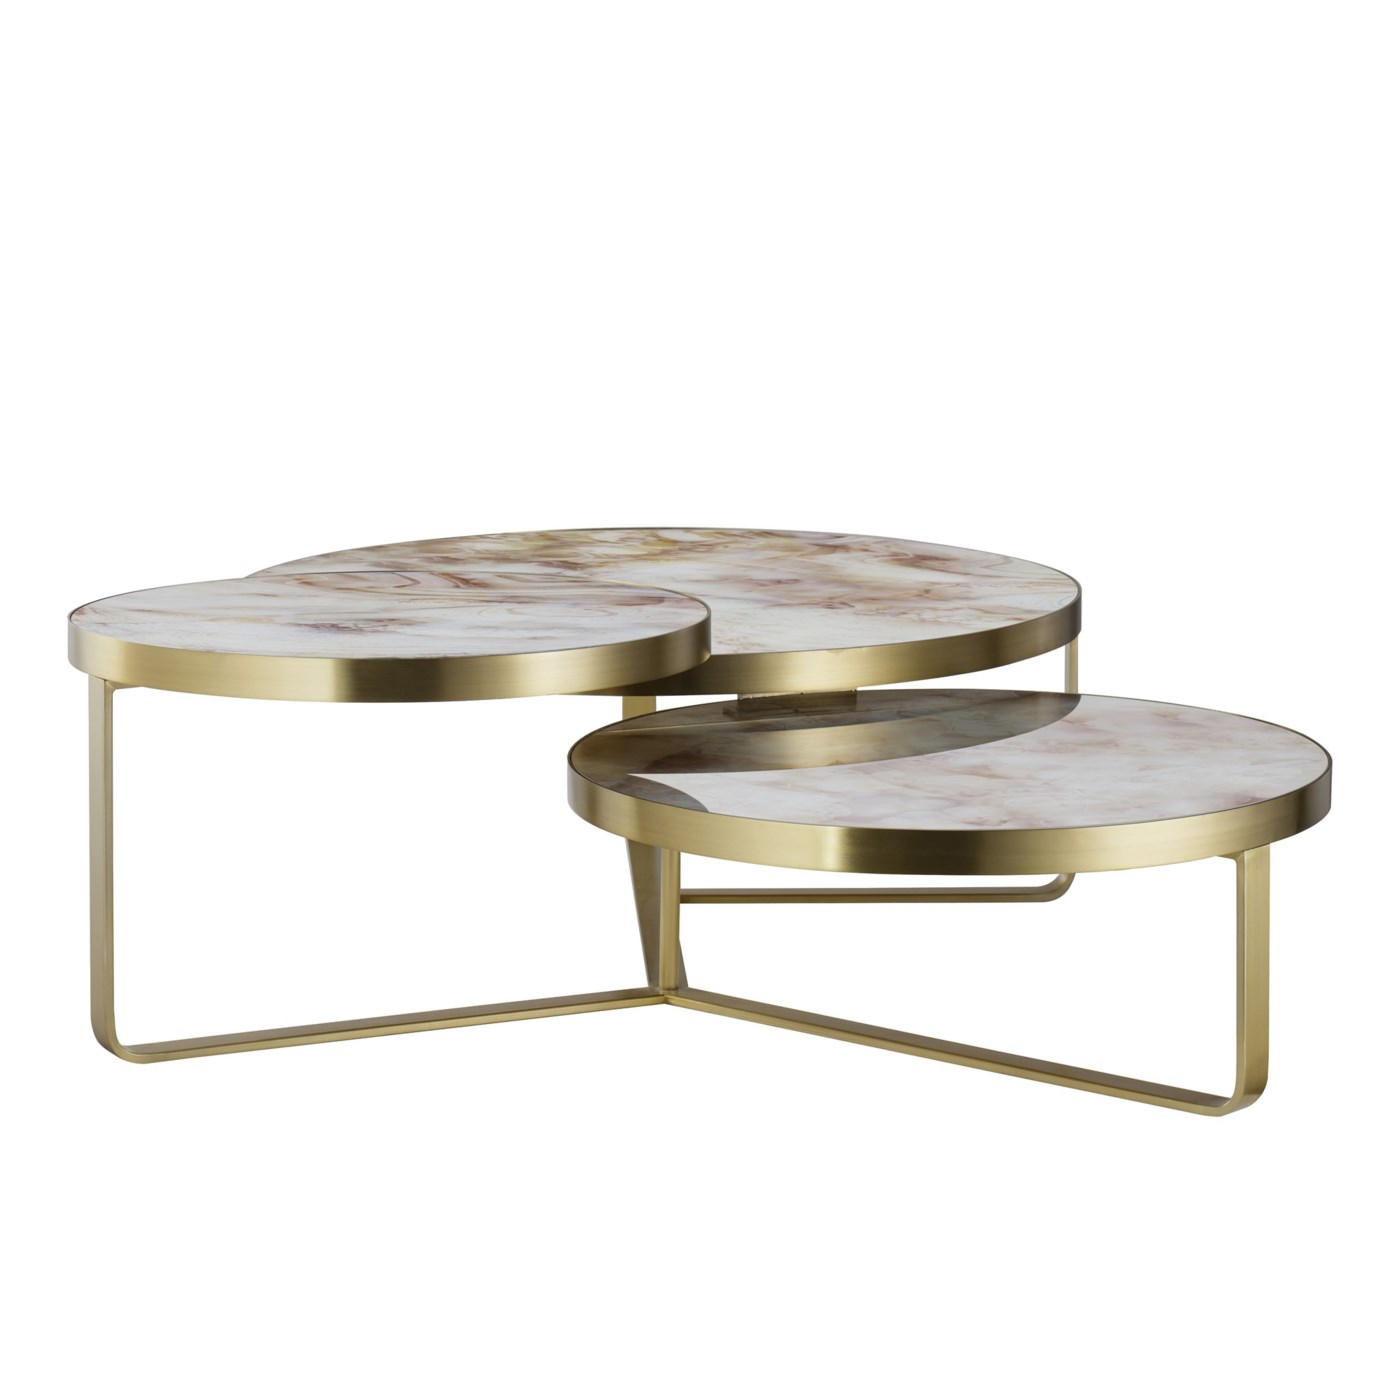 Rex Coffee Table - Round - coffee tables - Resource Decor